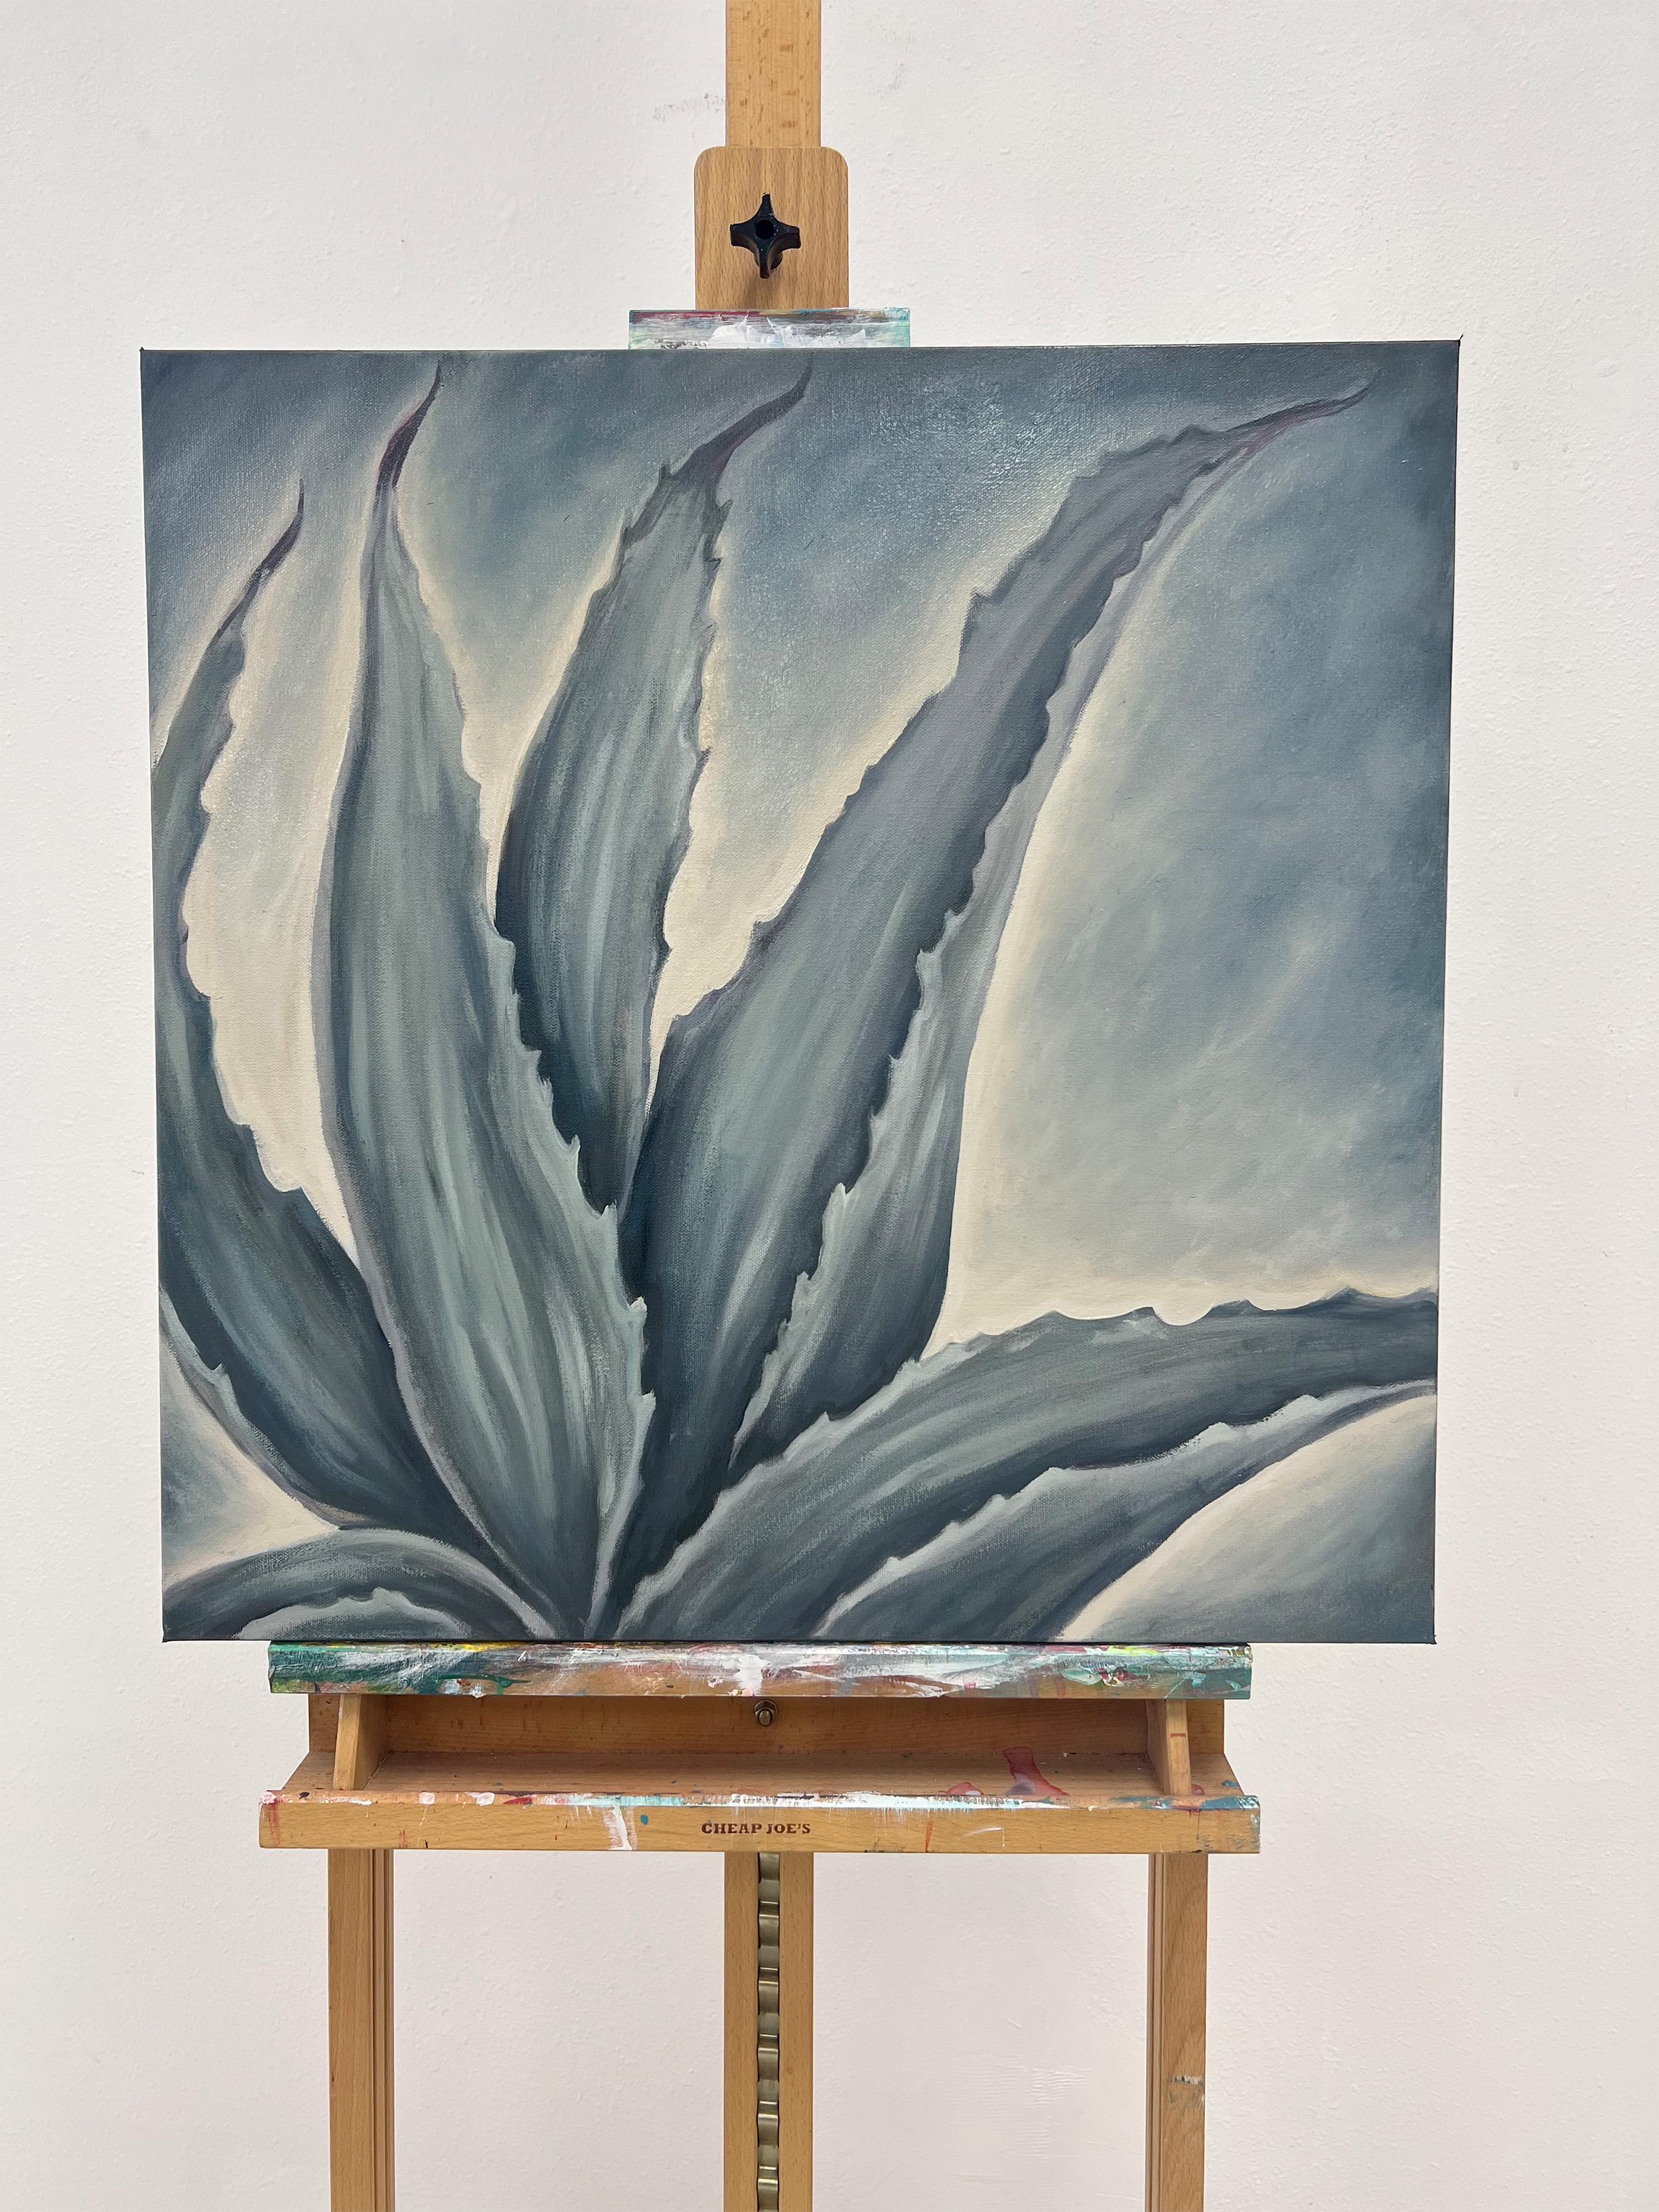 agave painting